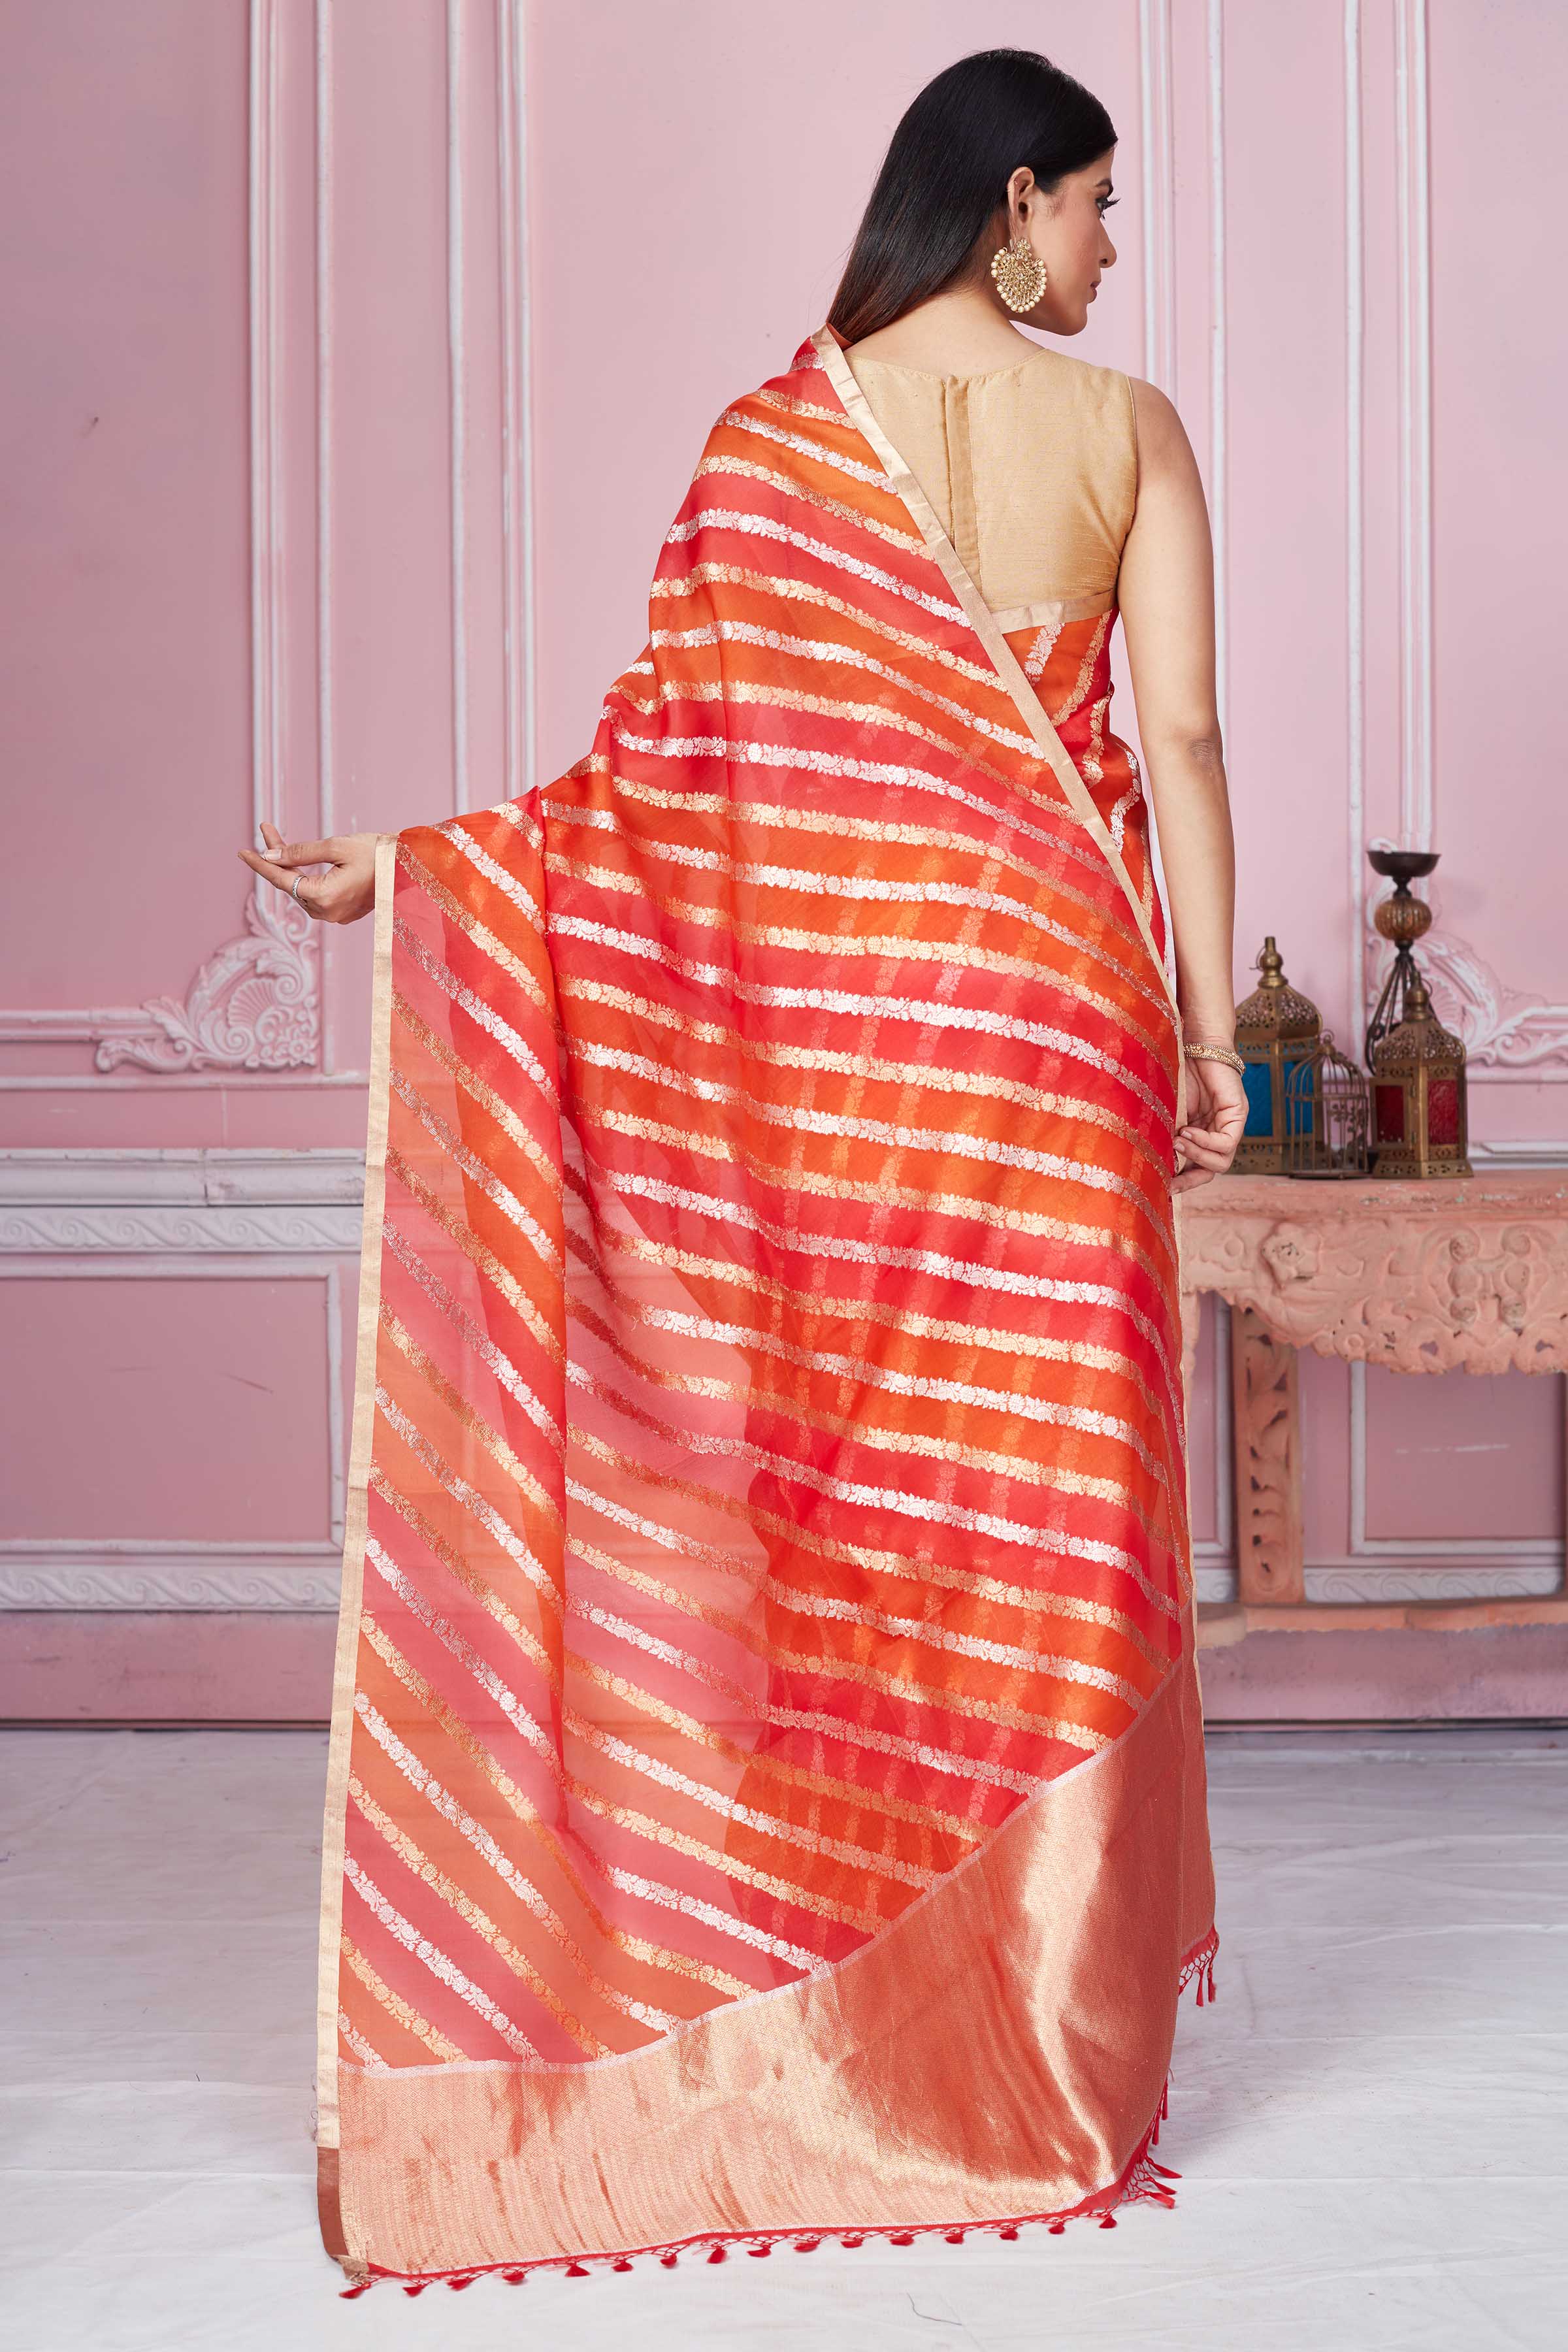 Shop red orange zari stripes Banarasi saree online in USA. Look your best on festive occasions in latest designer sarees, pure silk saris, Kanchipuram silk sarees, handwoven sarees, tussar silk saris, embroidered sarees from Pure Elegance Indian fashion store in USA.-back